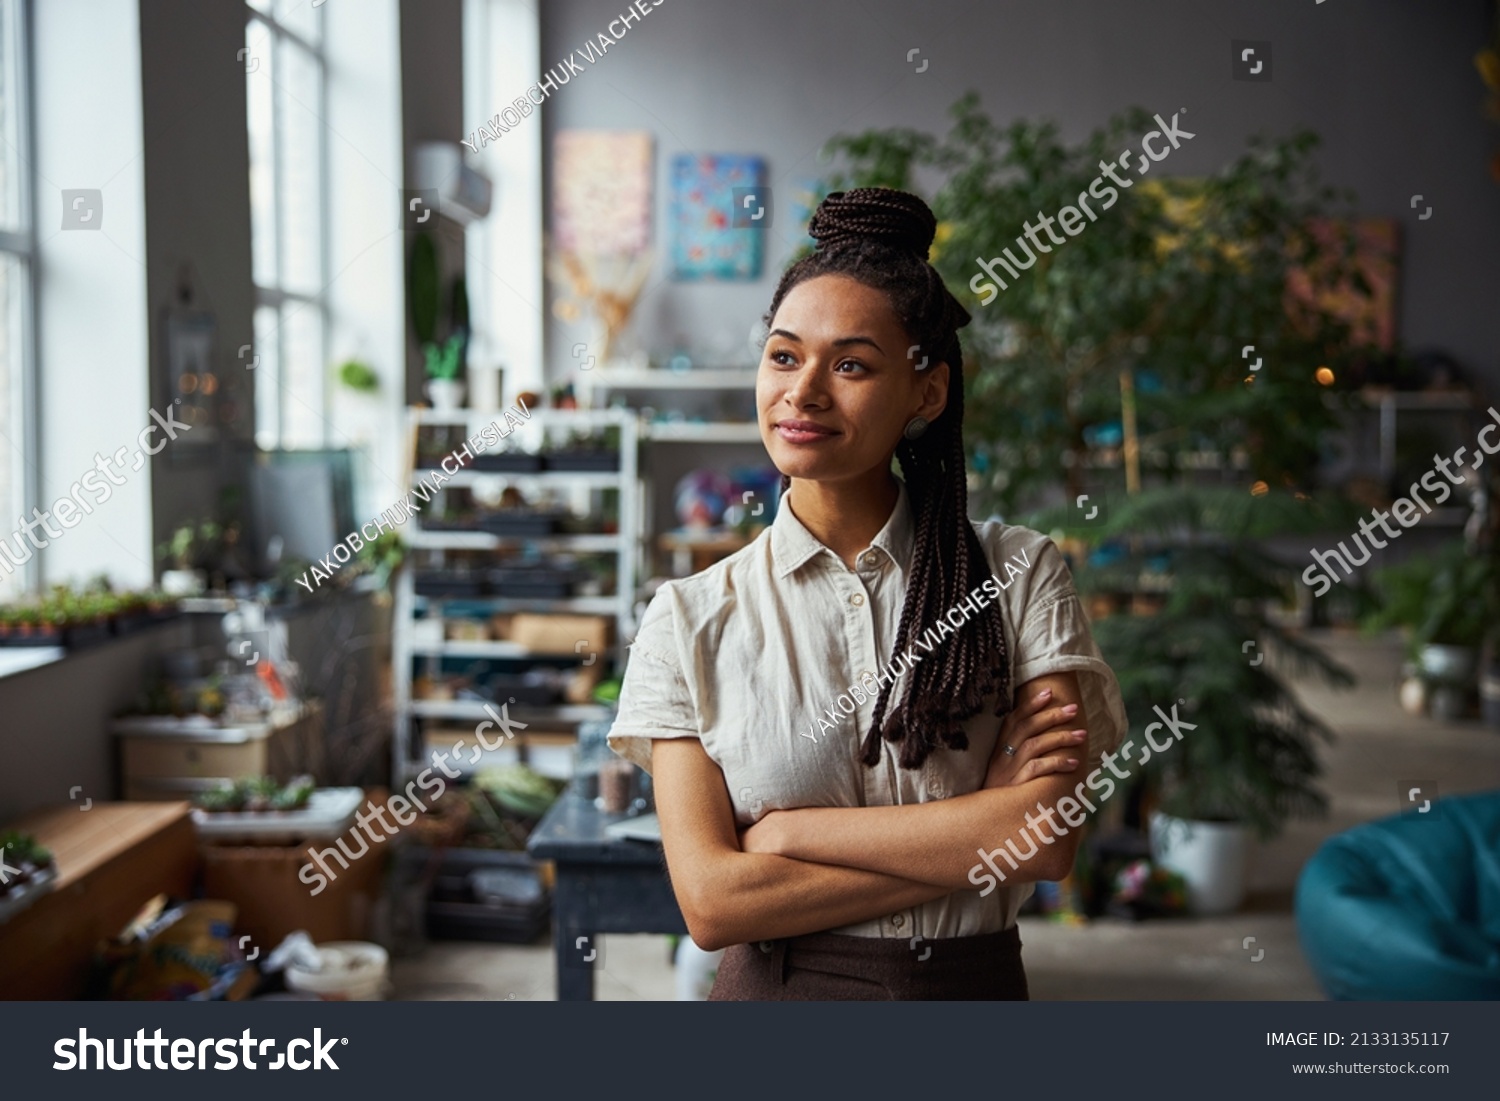 Smiling dreamy floral decorator with her arms folded looking away #2133135117